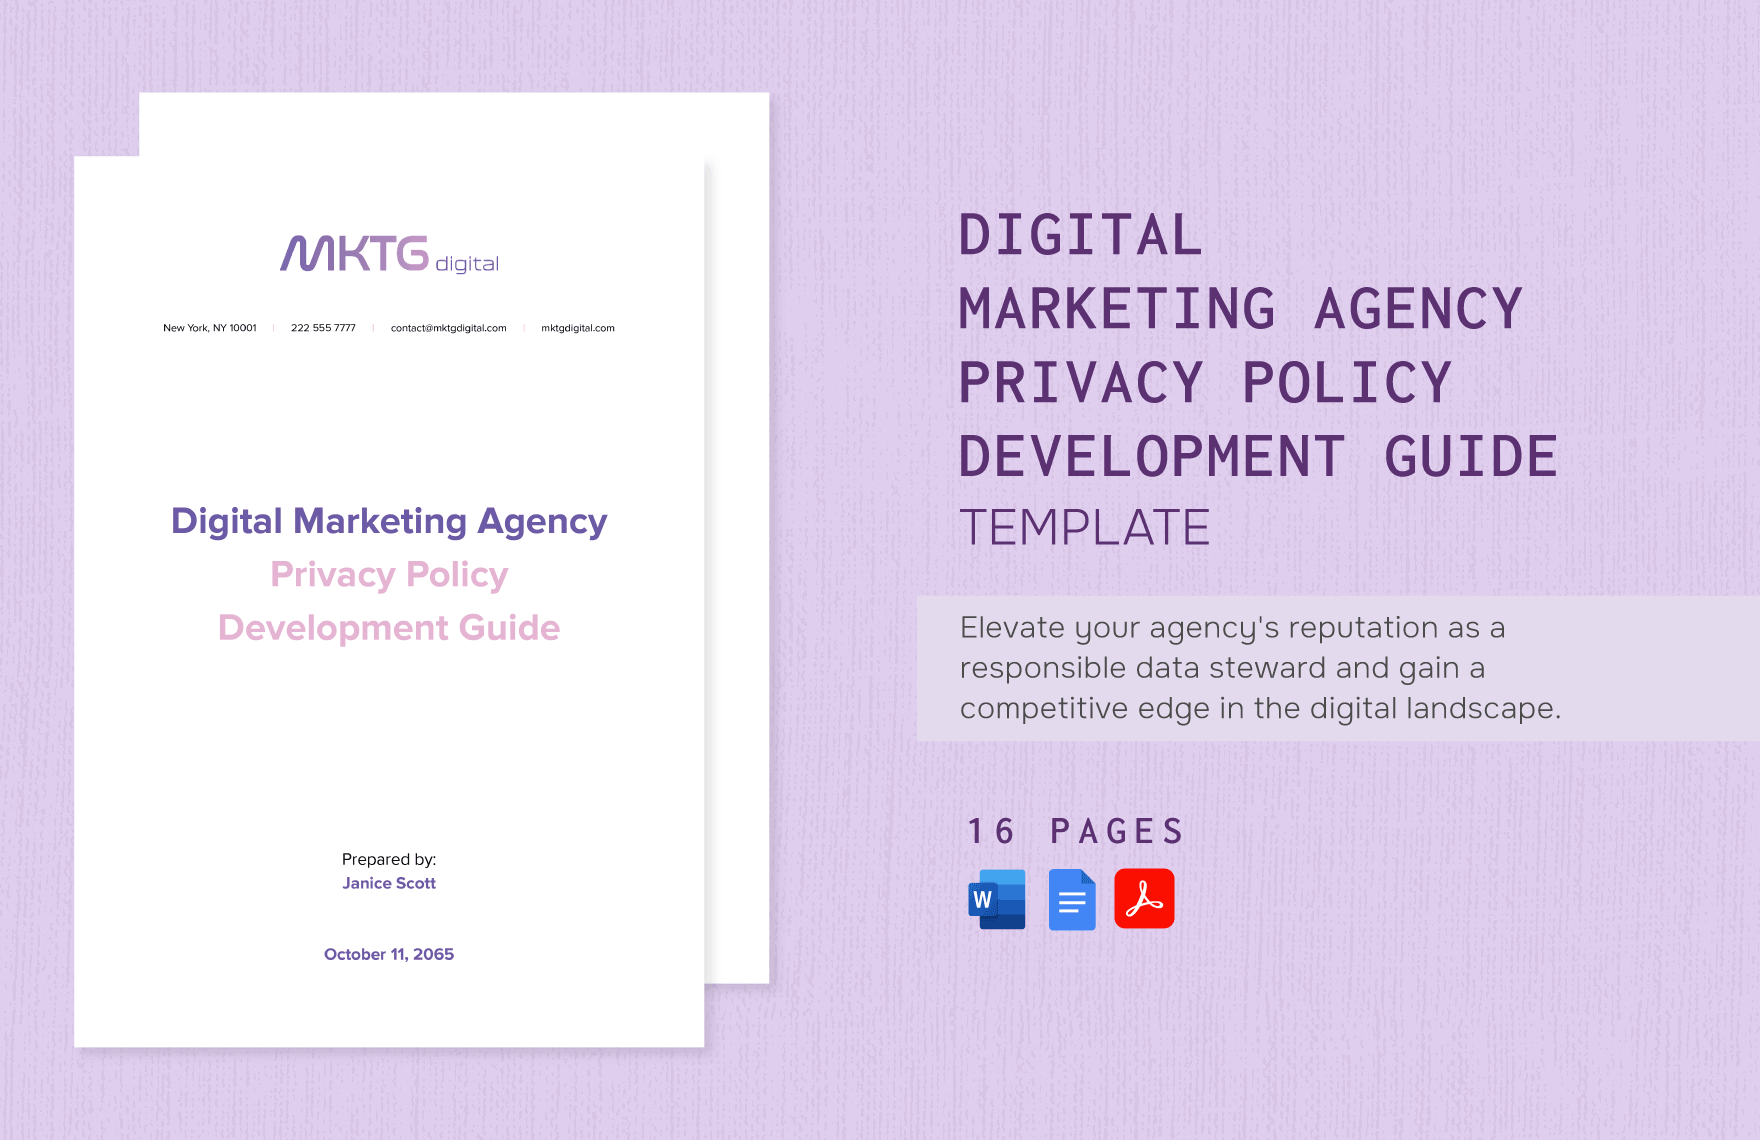 Digital Marketing Agency Privacy Policy Development Guide Template